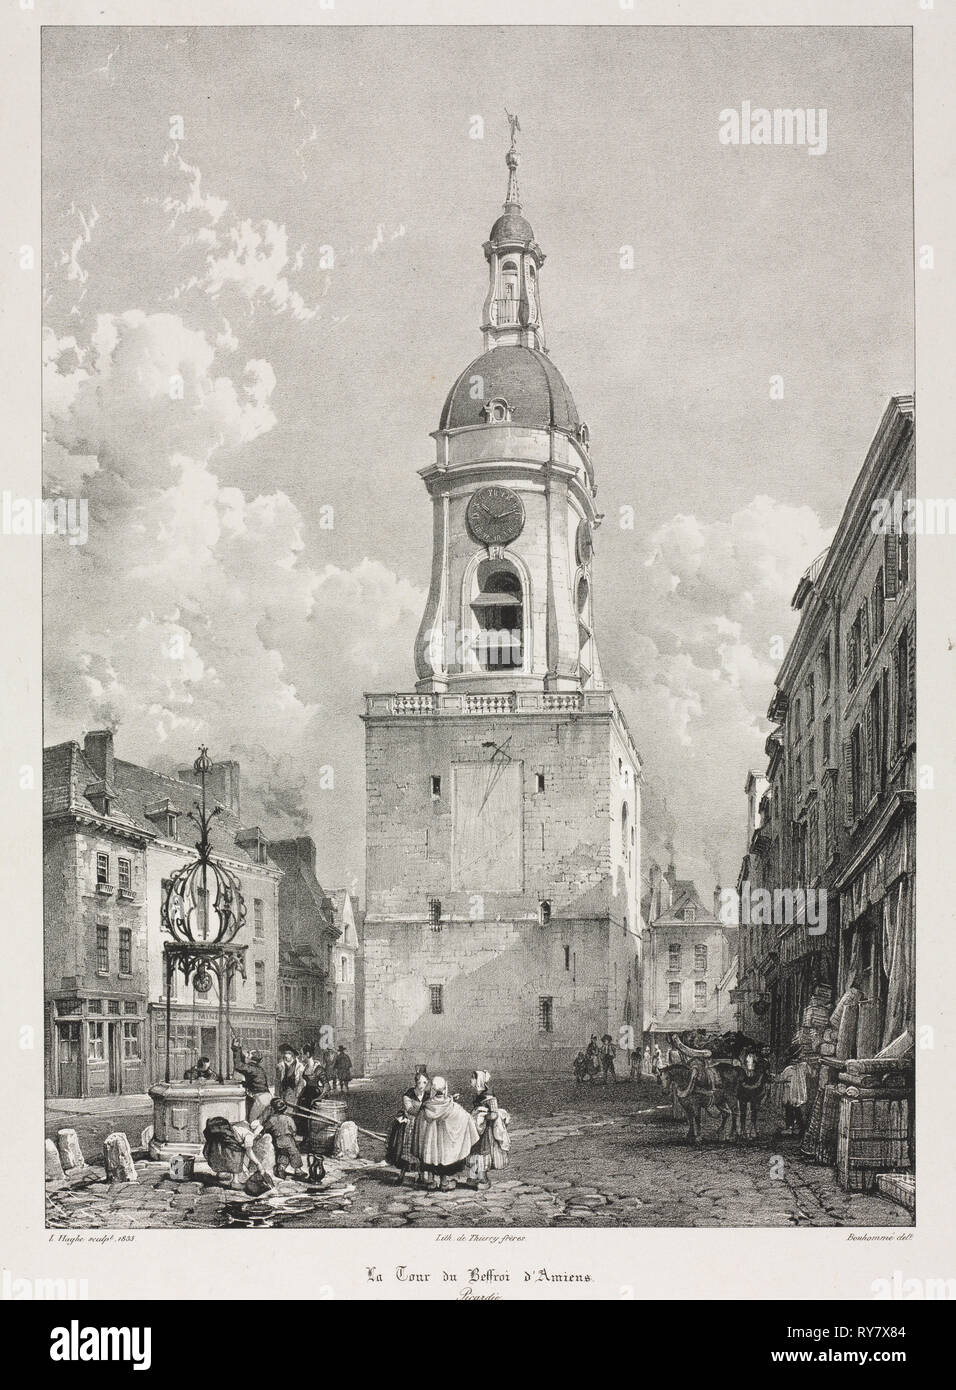 Picturesque and Romantic Travels in Old France, Picardie:  The Belfry Tower of Amiens, Picardie (Voyages pittoresques et romantiques dans l'ancienne France, Picardie : La Tour du Beffroi d' Amiens, Picardie), after François Bonhommé (French, 1809-1881), 1835. Louis Haghe (British, 1806-1885), Thierry Brothers. Lithograph on chine colle; sheet: 36.1 x 26.6 cm (14 3/16 x 10 1/2 in.); image: 32.7 x 23.7 cm (12 7/8 x 9 5/16 in.); secondary support: 47.4 x 35.3 cm (18 11/16 x 13 7/8 in Stock Photo